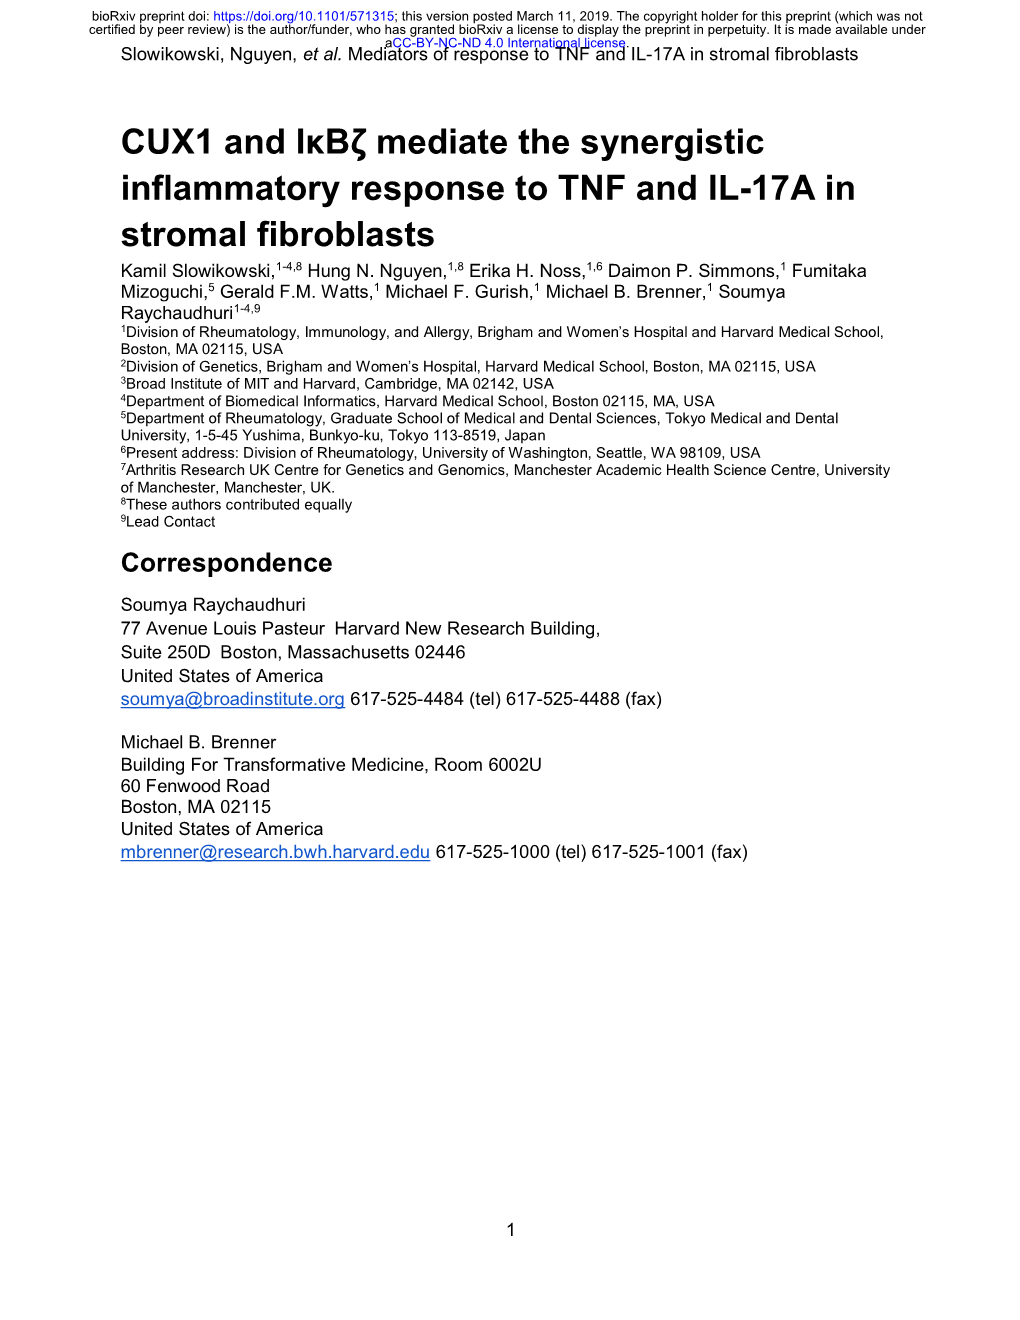 CUX1 and Iκbζ Mediate the Synergistic Inflammatory Response to TNF and IL-17A in Stromal Fibroblasts Kamil Slowikowski,1-4,8 Hung N